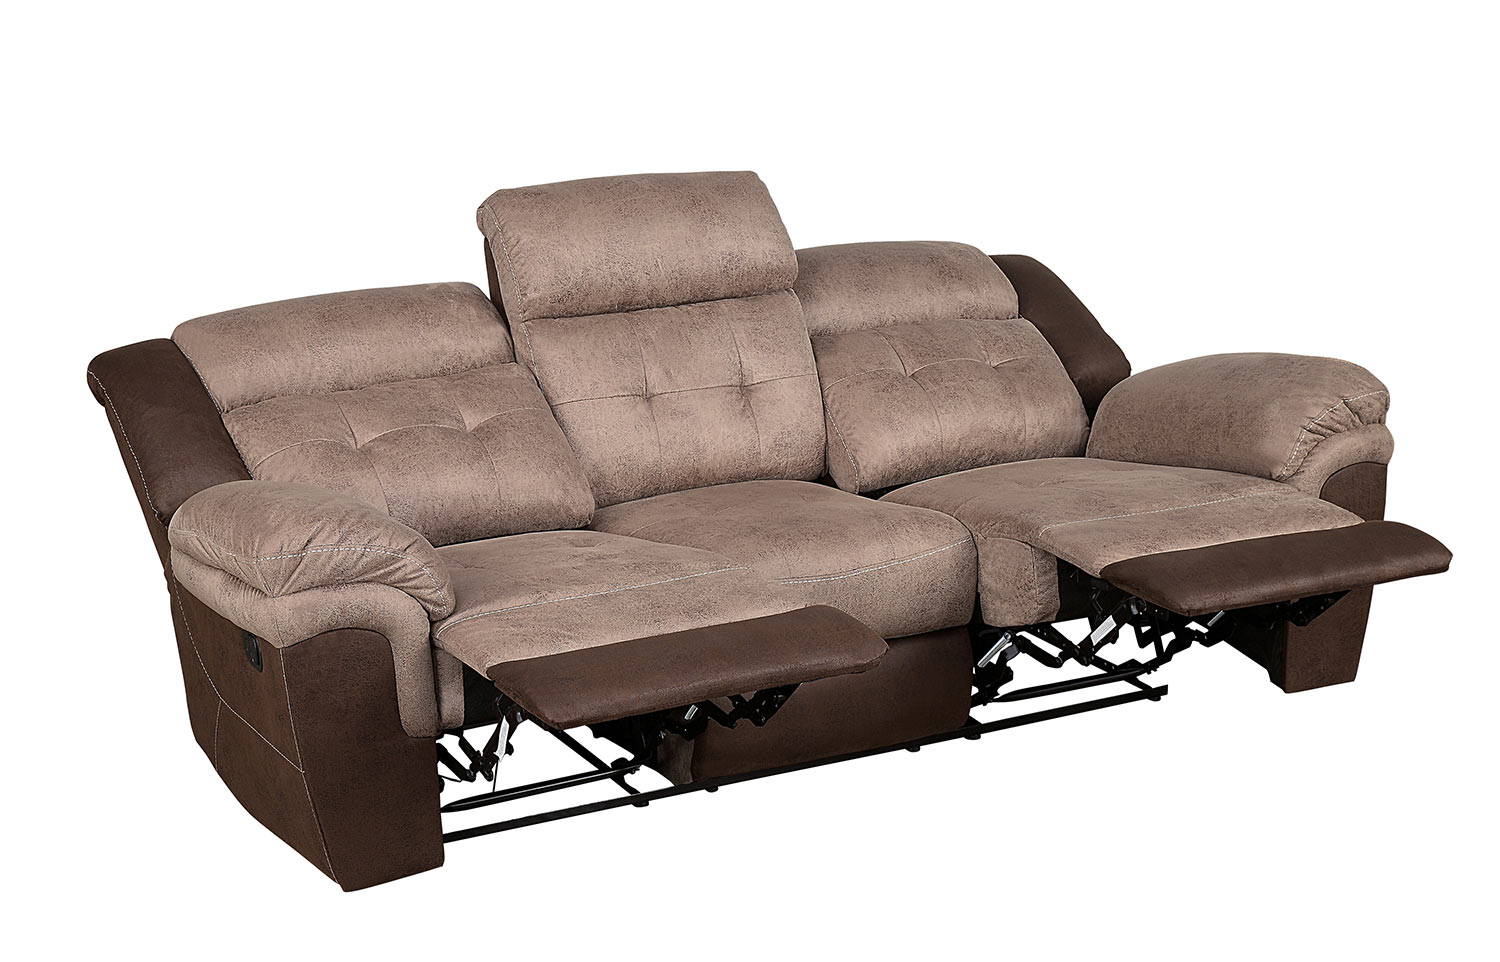 Homelegance Chai Double Reclining Sofa - Brown and dark brown polished microfiber